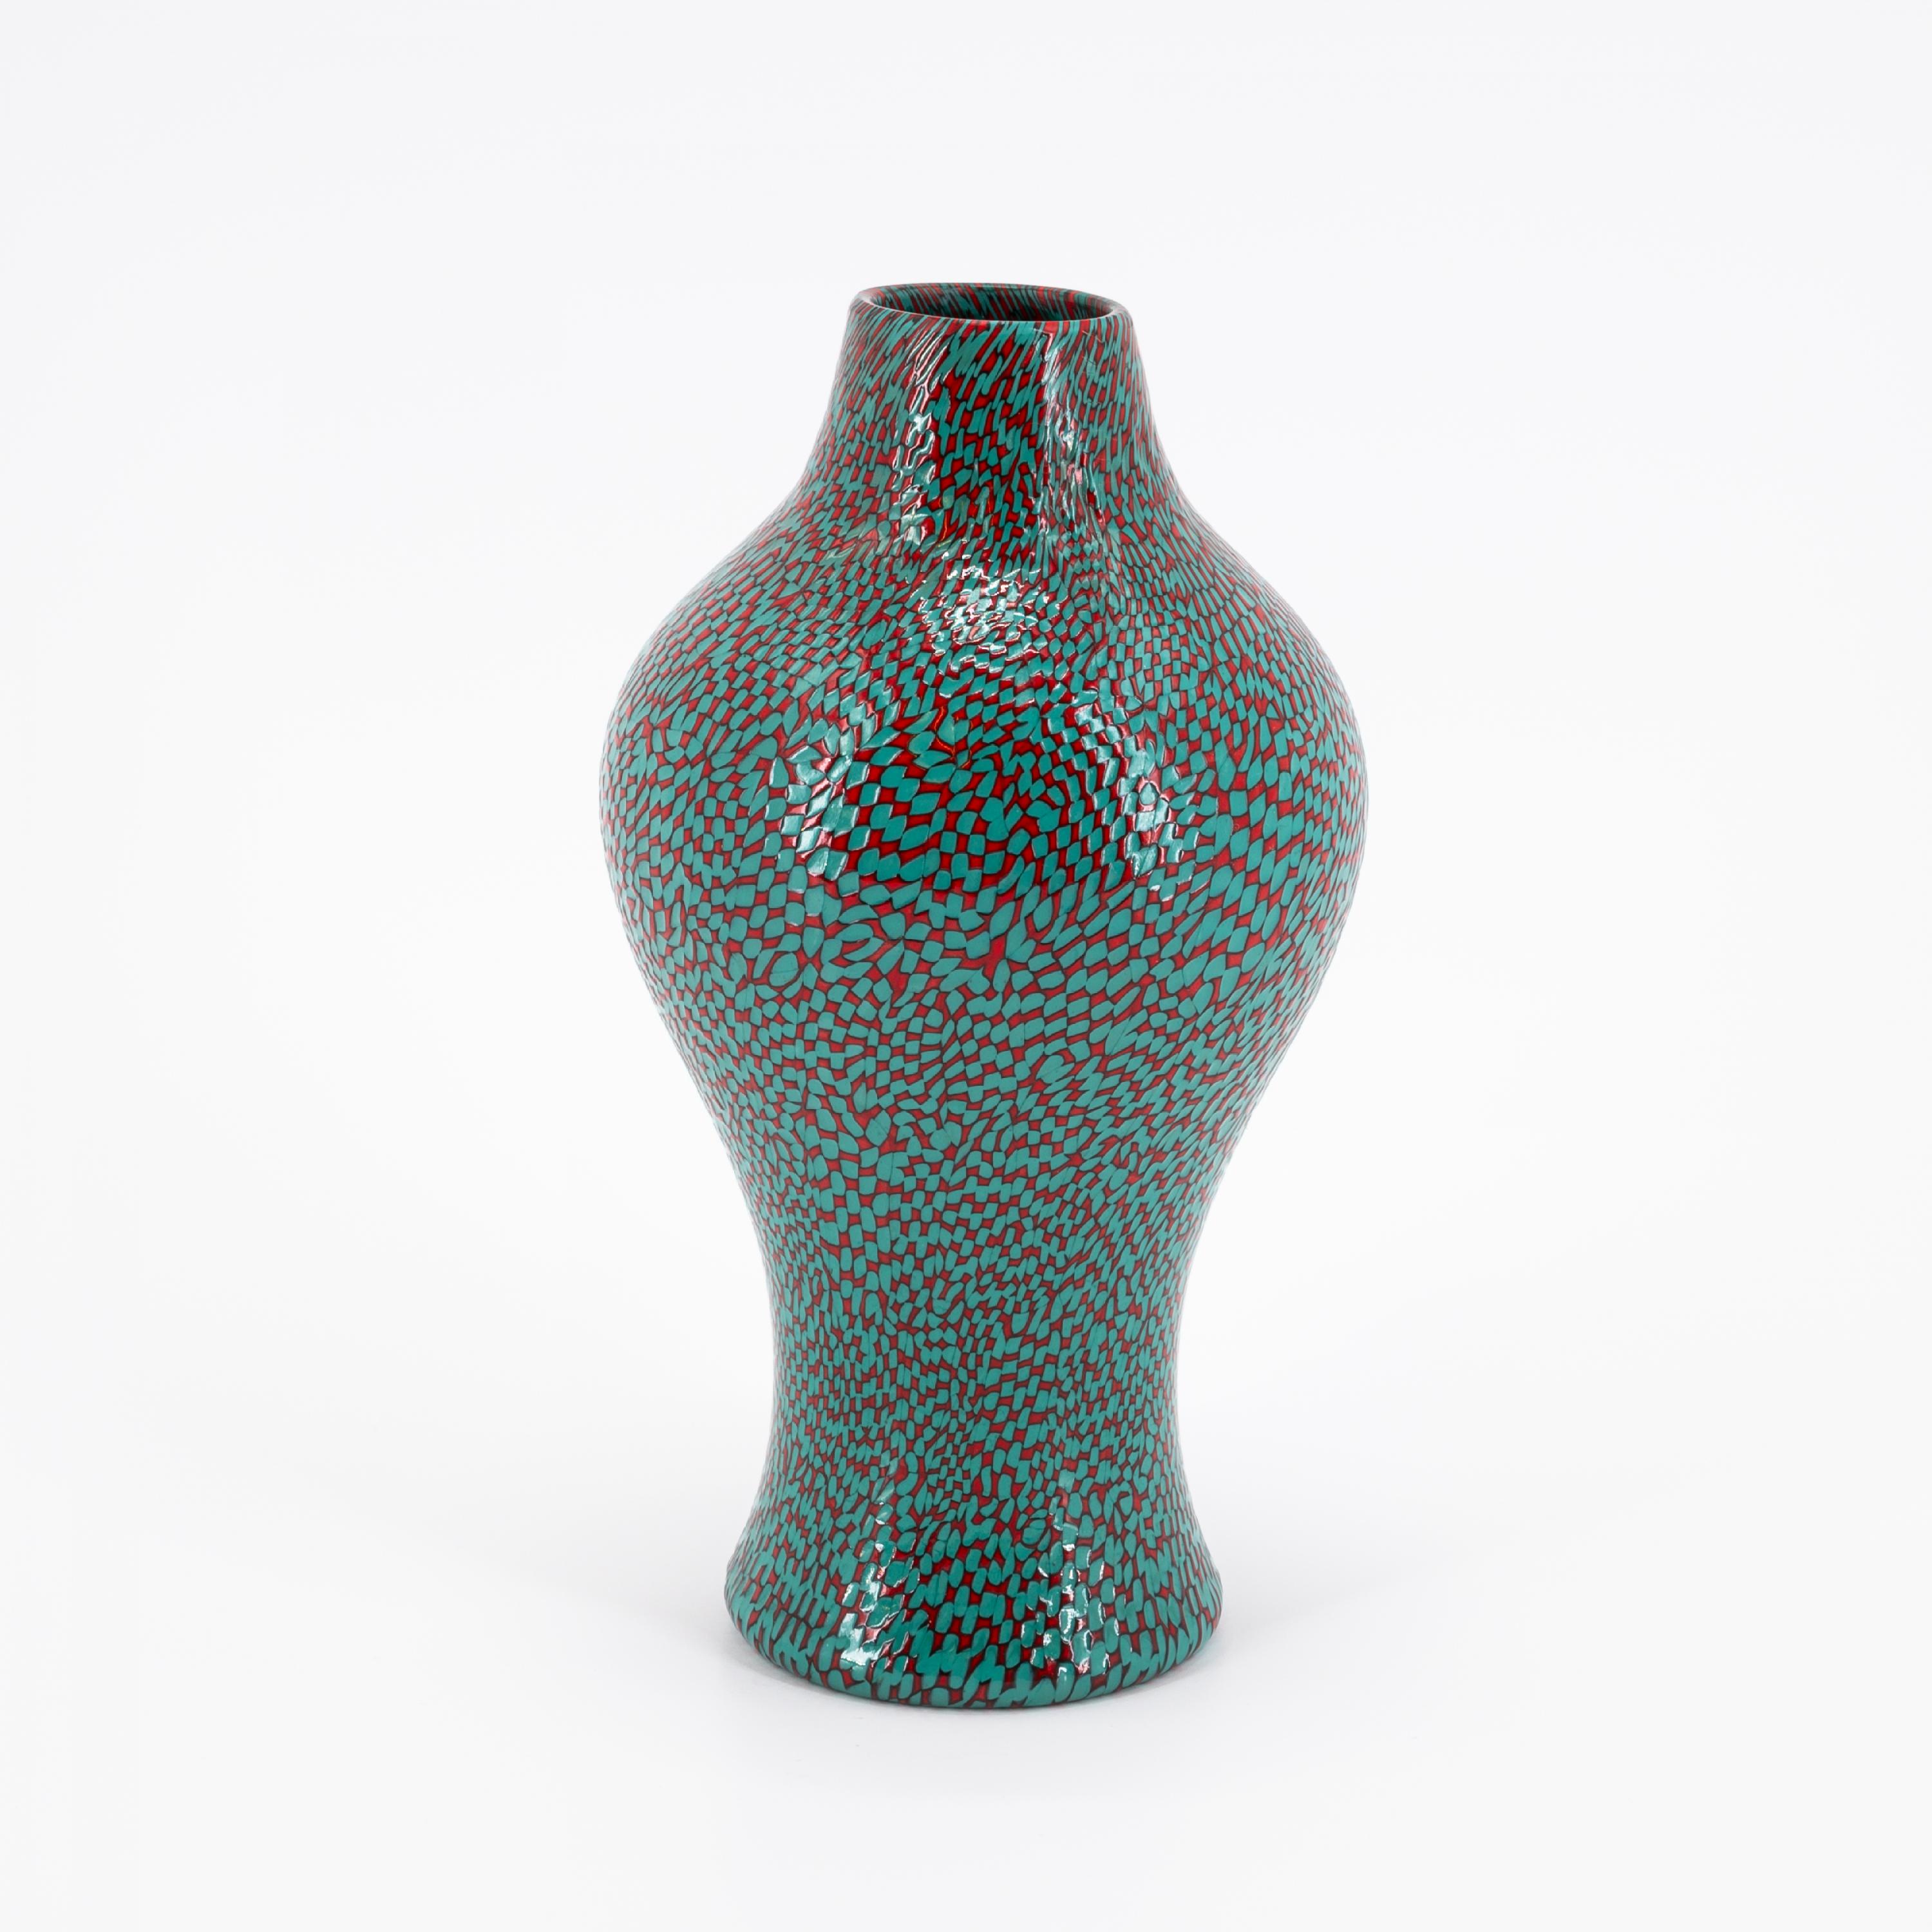 GLASS VASE WITH DeCOR 'A DAMA' - Image 4 of 7